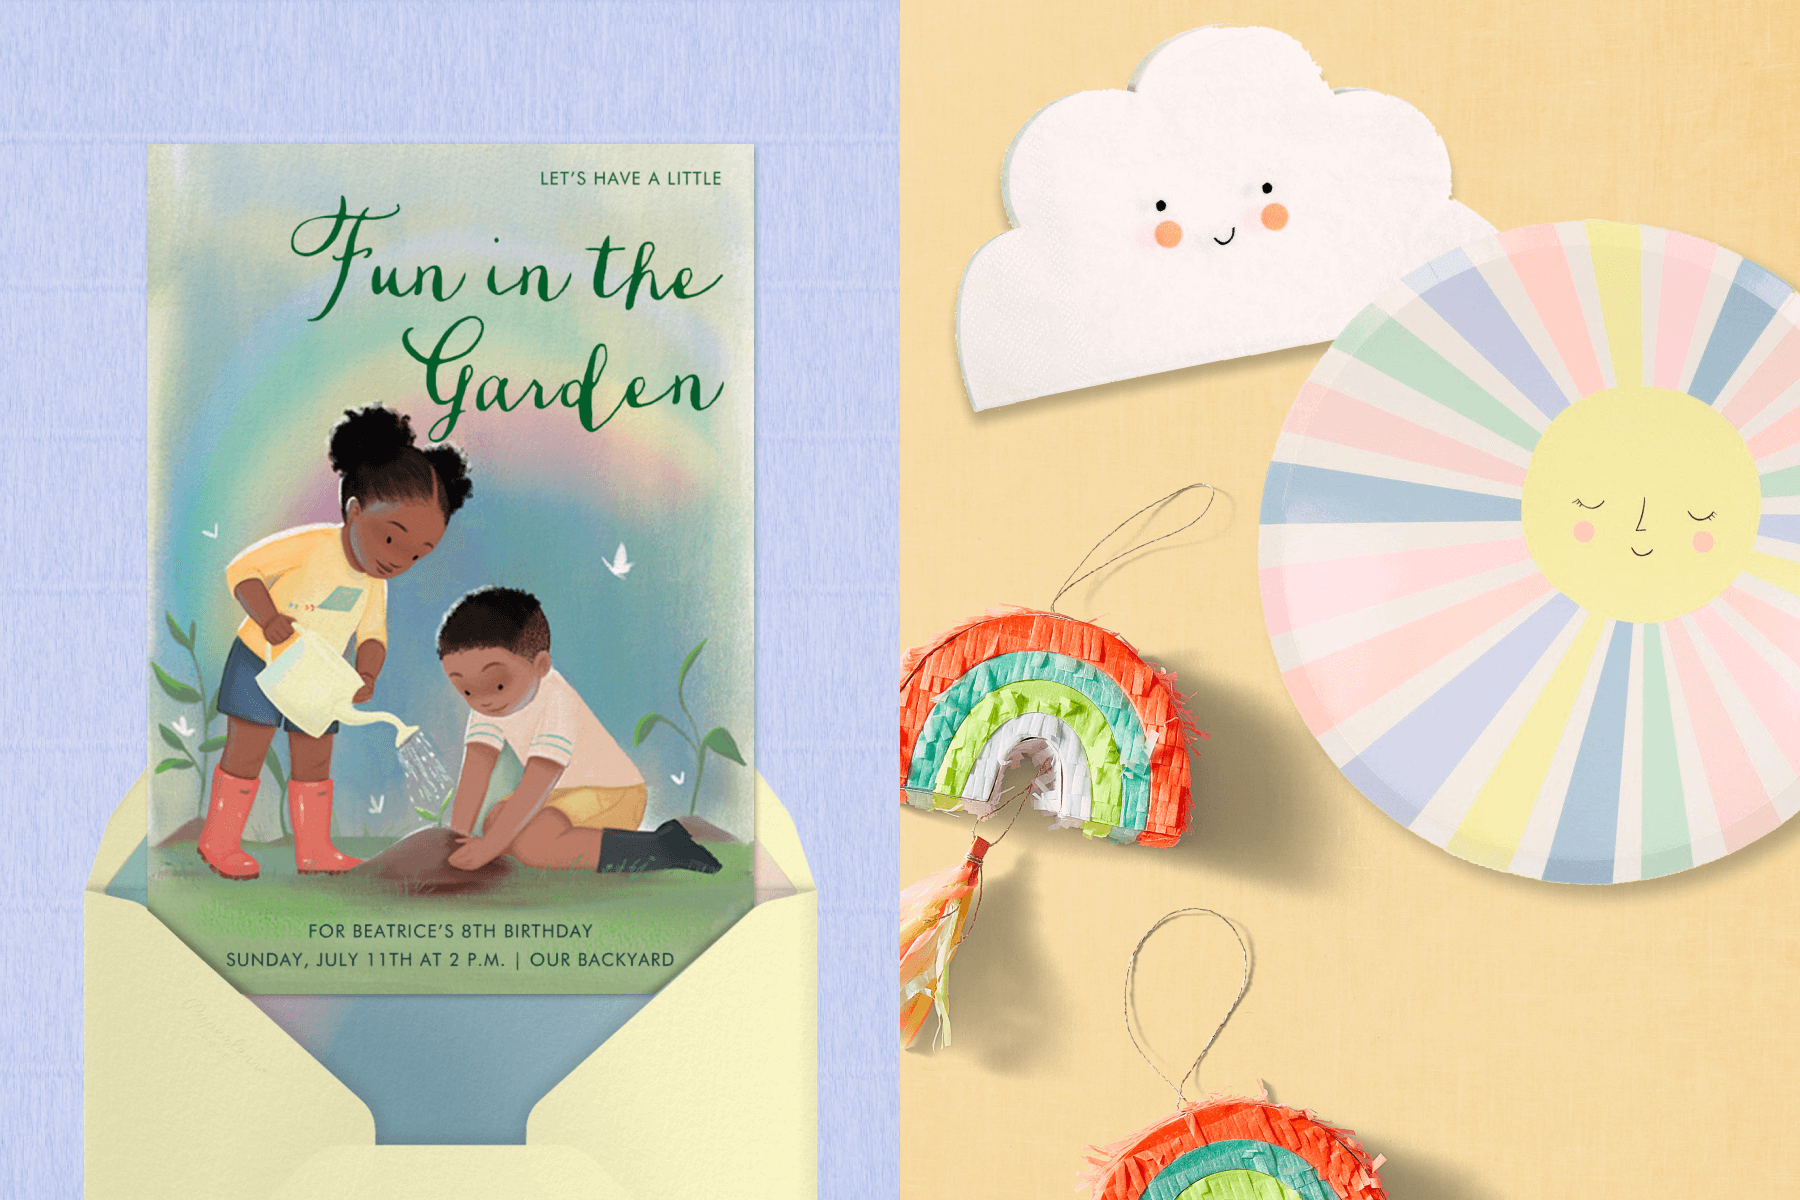 Left: A child’s birthday party invitation shows an illustration of two young children watering a newly planted seedling with the words “Fun in the garden.” Right: A smiling cloud-shaped napkin, a paper plate with a rainbow sunshine, and two small rainbow piñata ornaments. 